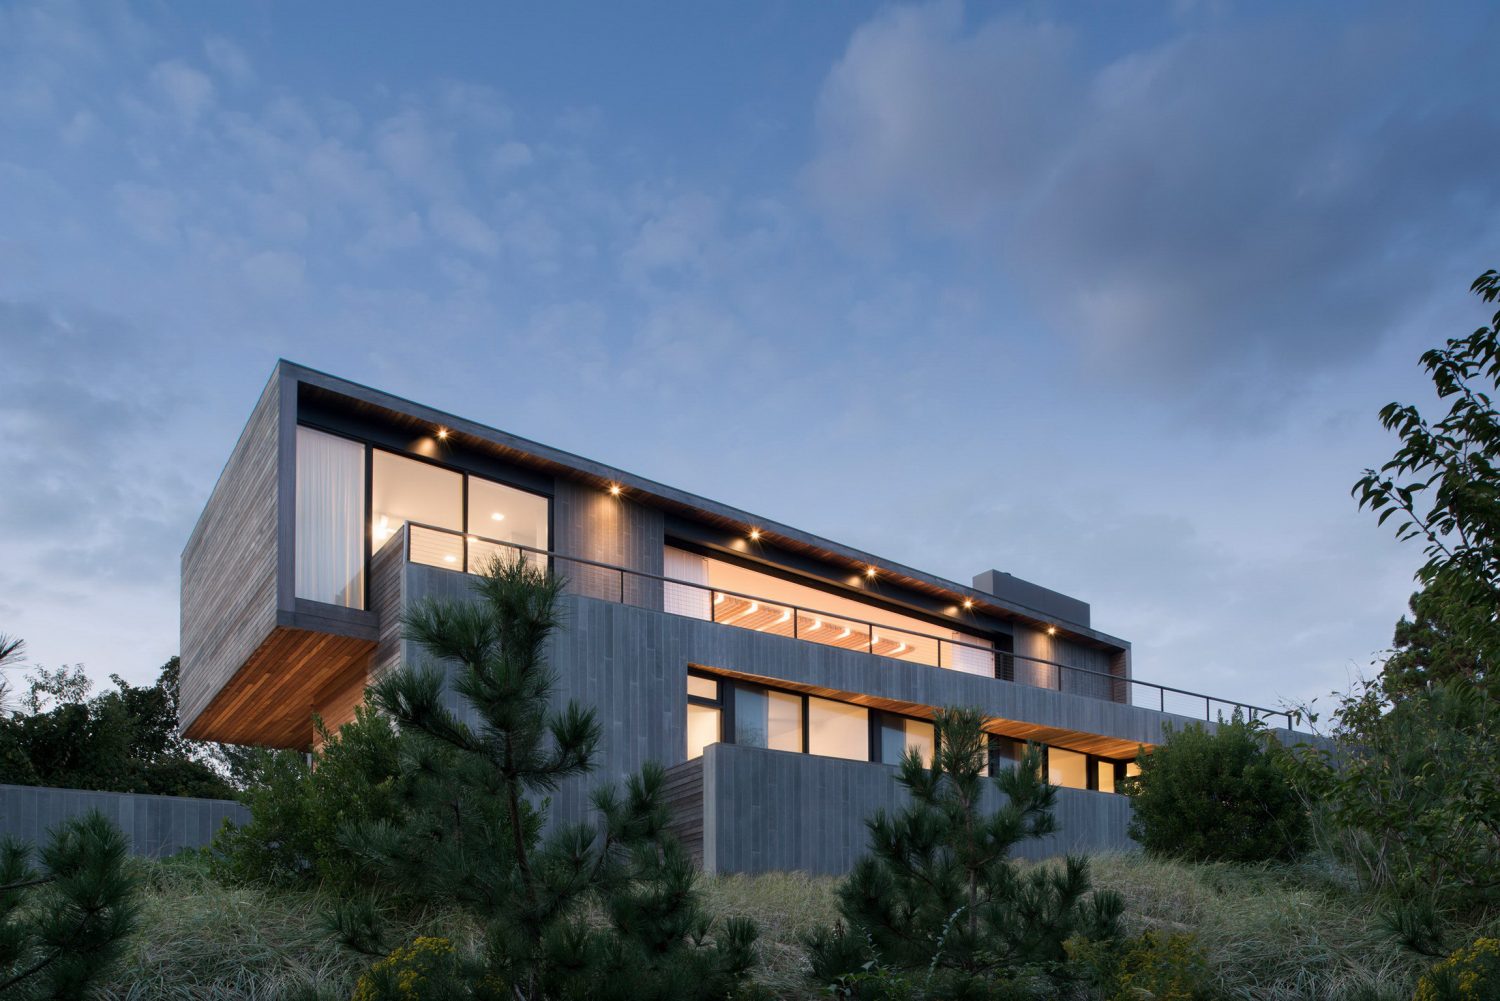 Hither Hills by Bates Masi Architects